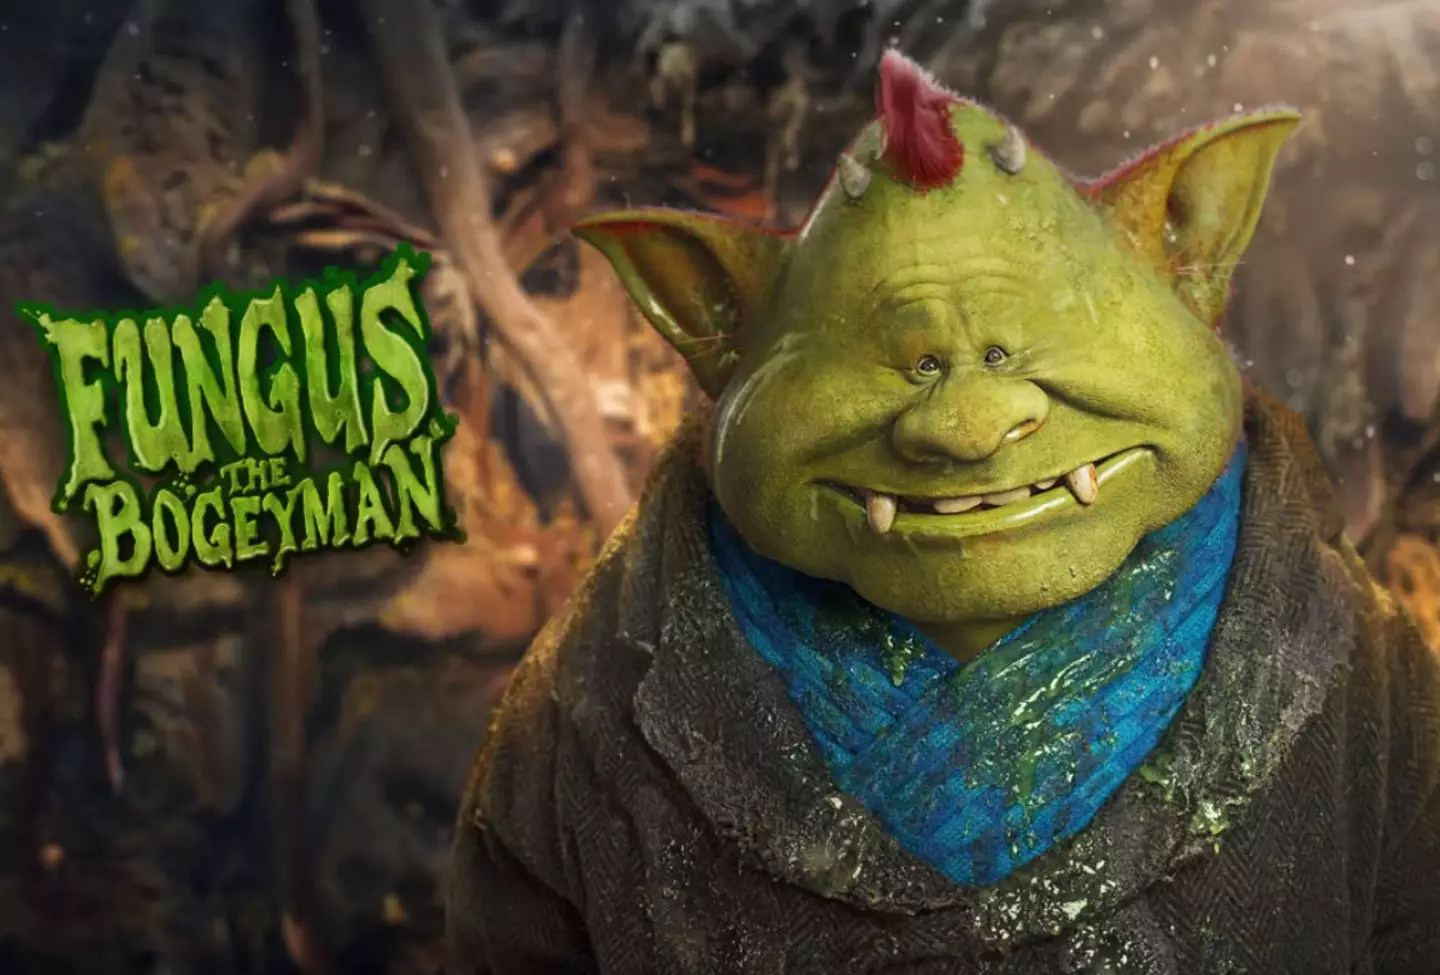 If you have green snot today, congratulations, you match with Fungus the Bogeyman.